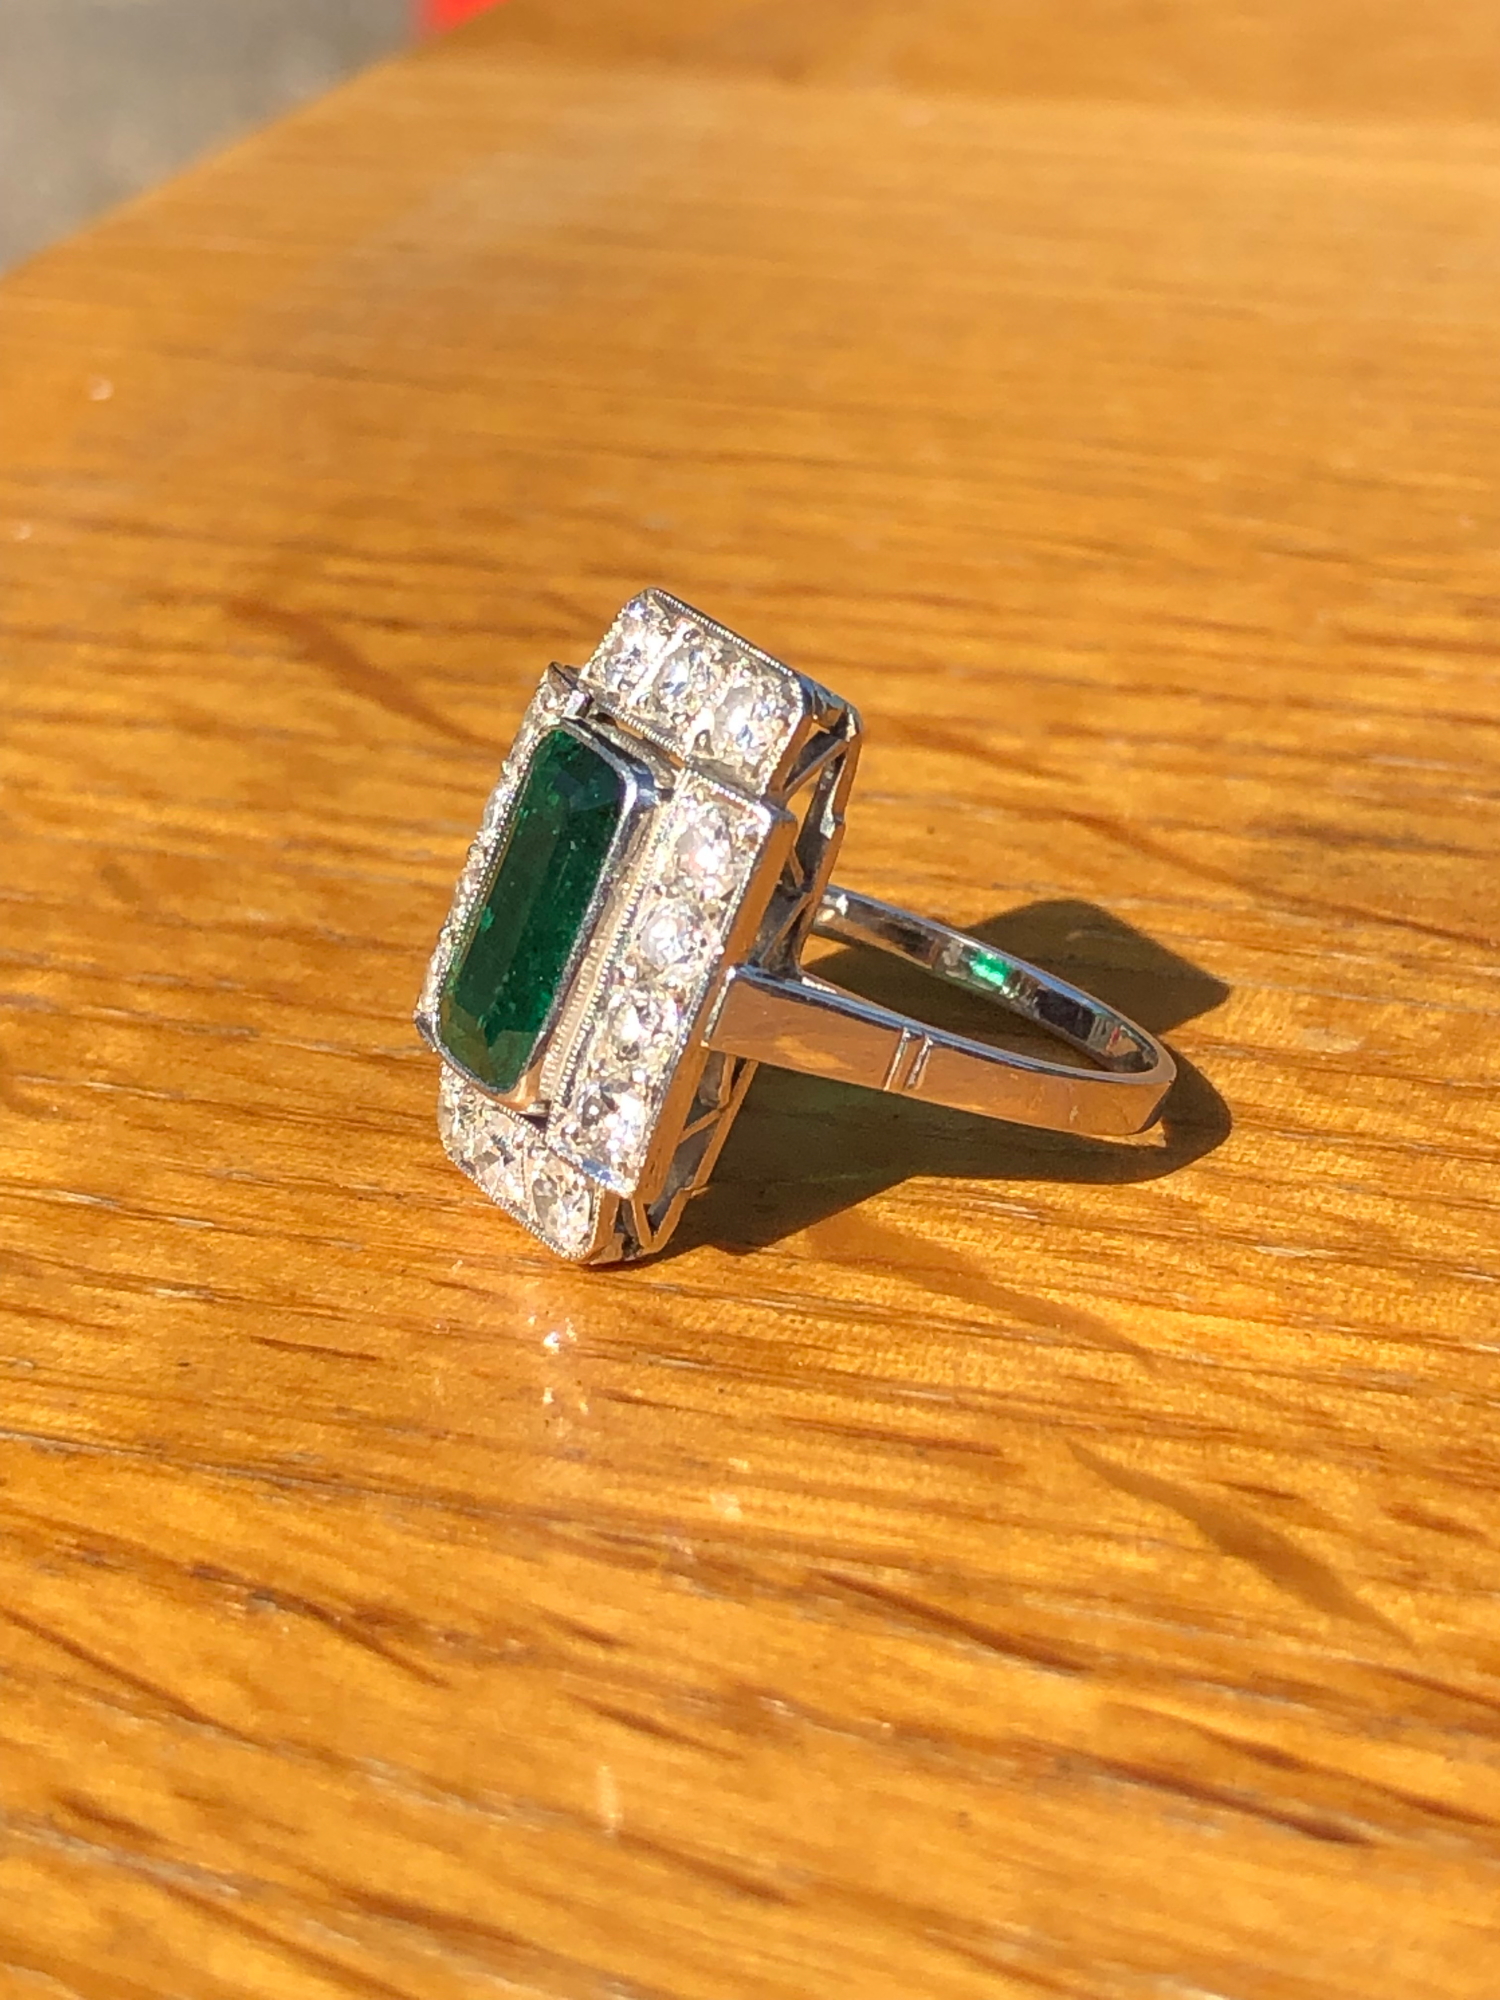 AN ART DECO EMERALD AND DIAMOND PANEL RING. THE LOZENGE SHAPE EMERALD APPROX 11 X 6mm, SURROUNDED BY - Image 3 of 10